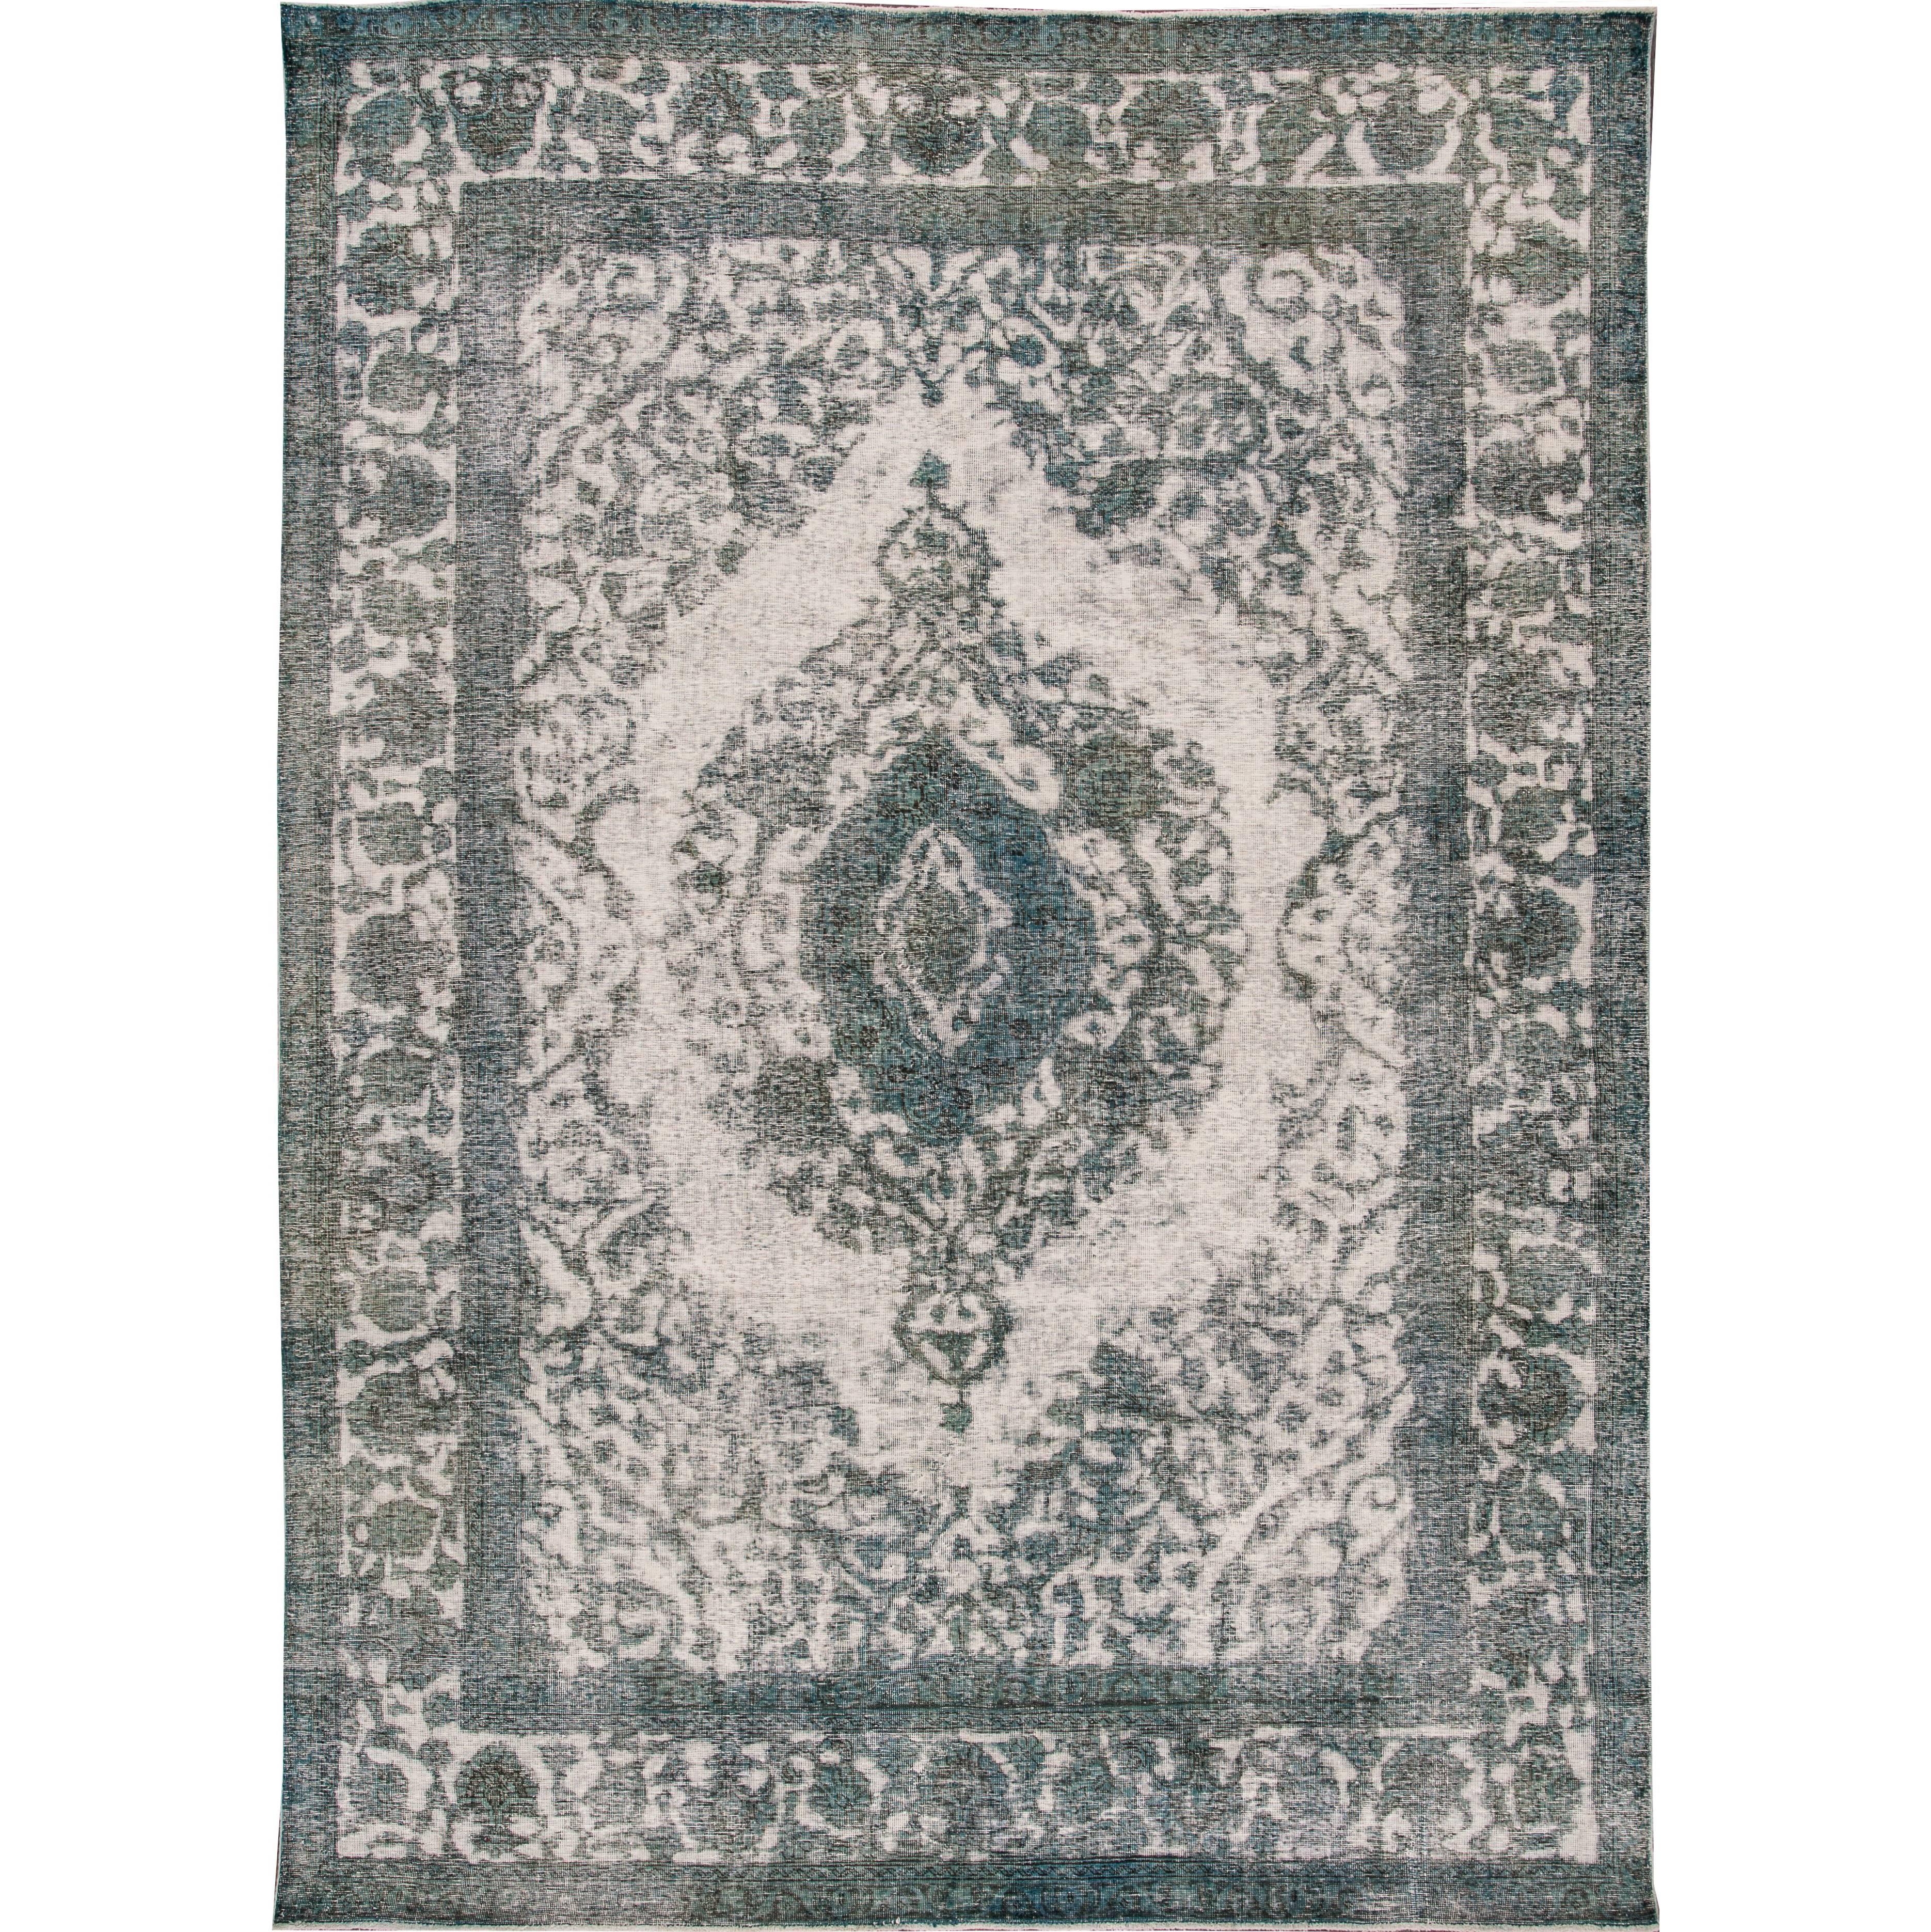 Early 20th Century Antique Gray, Blue Overdyed Persian Rug